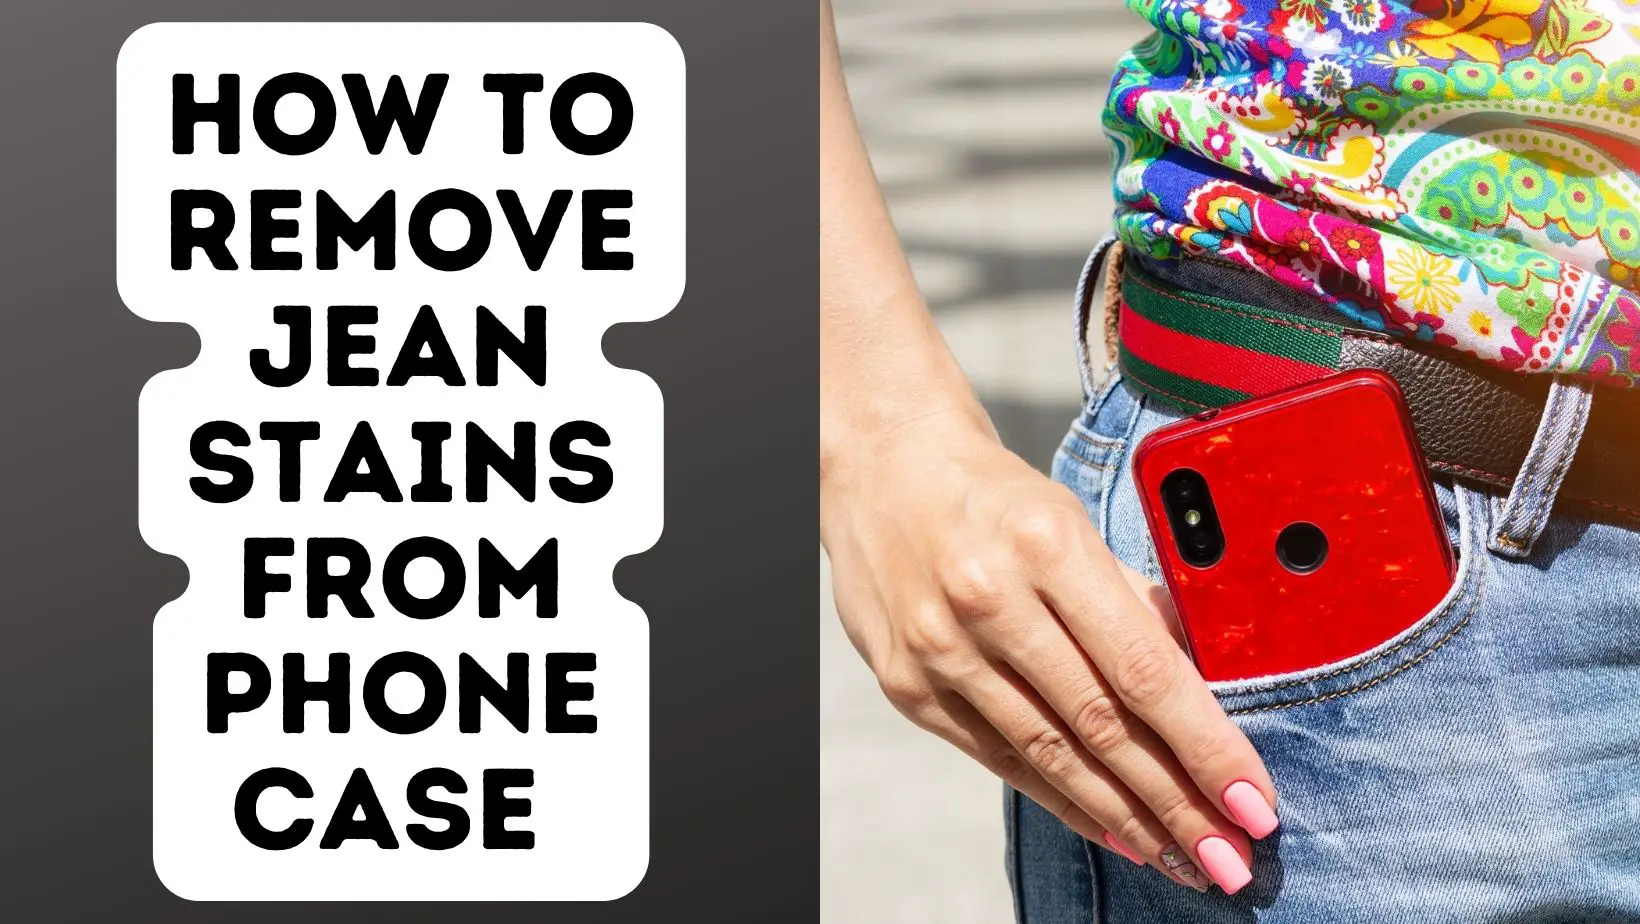 How To Remove Jean Stains From Phone Case Quickly